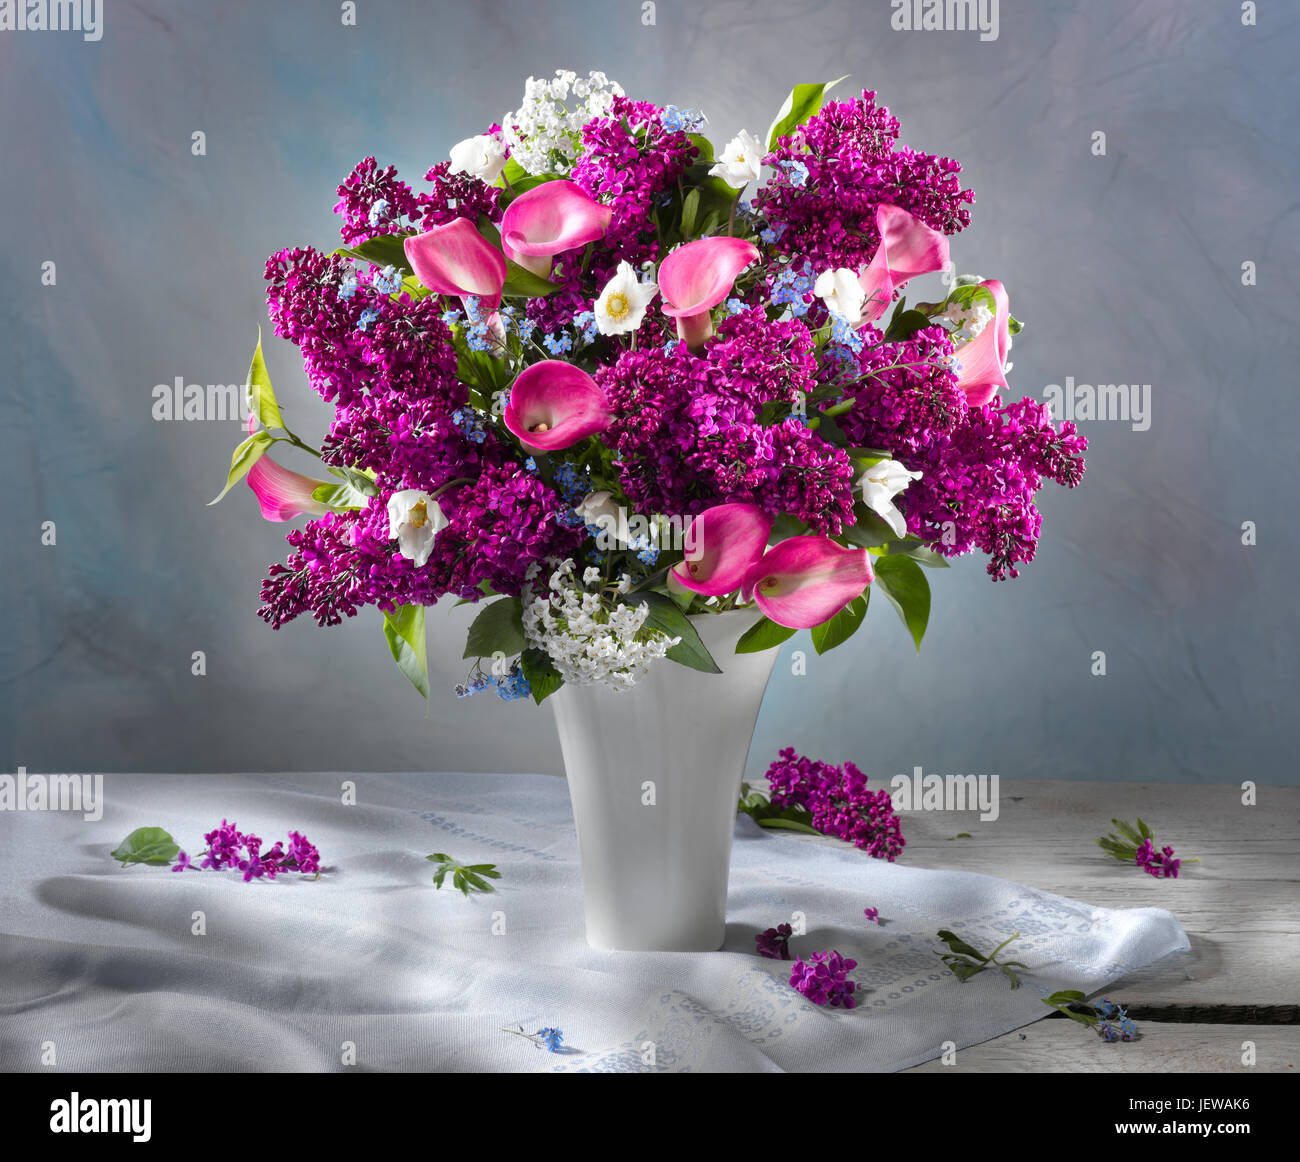 Bouquet of flowers with lilacs. Stock Photo